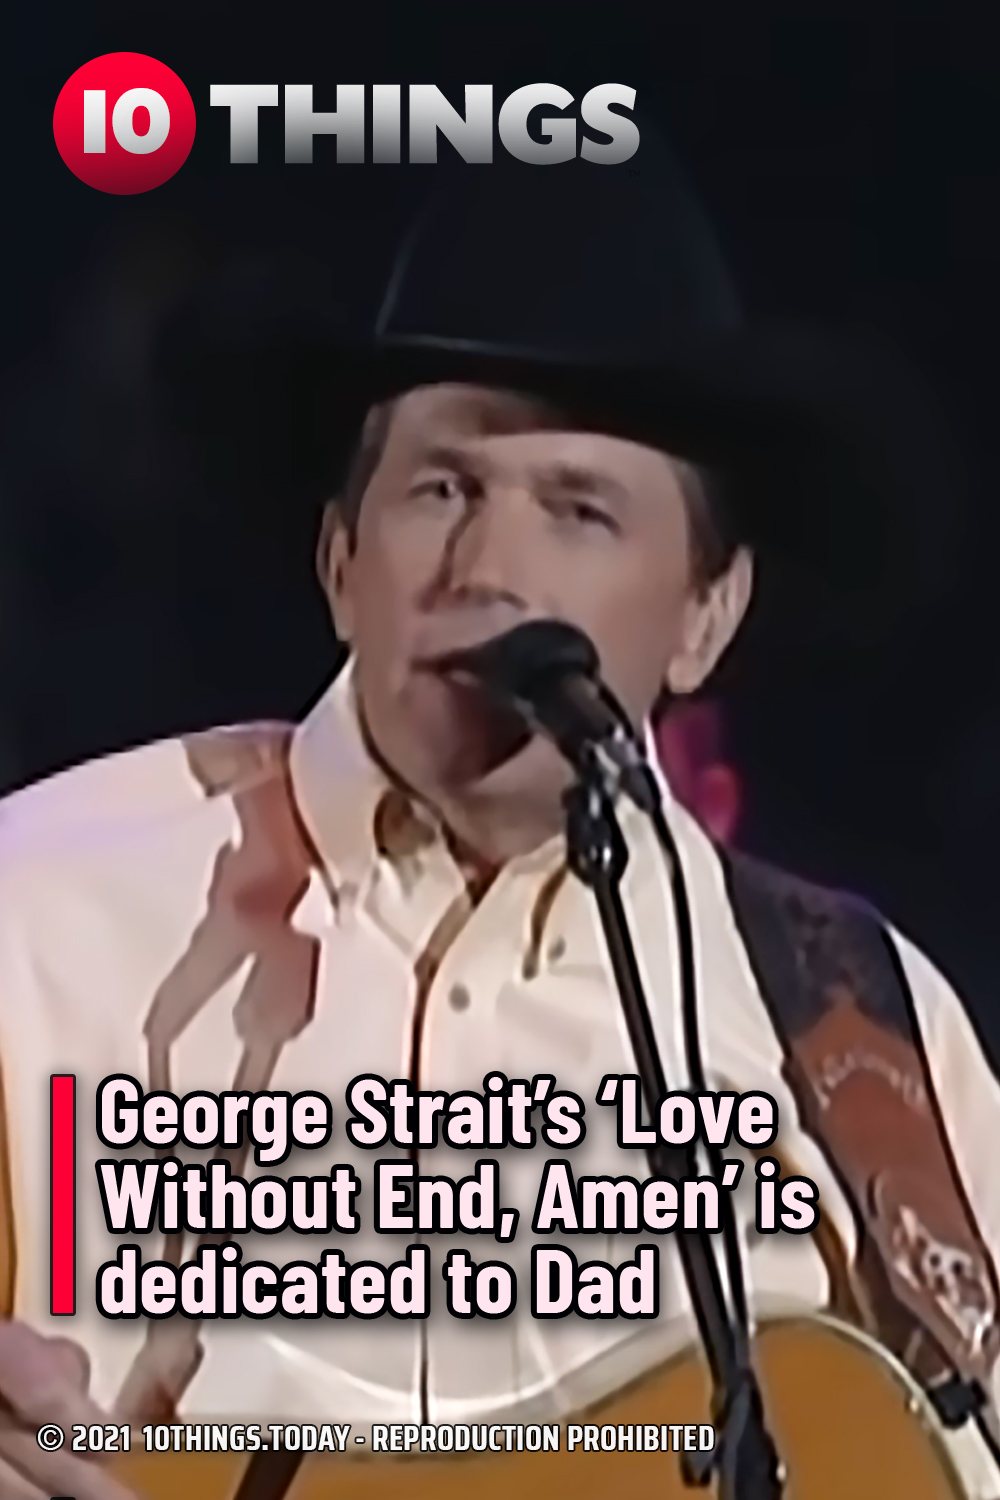 George Strait’s ‘Love Without End, Amen’ is dedicated to Dad